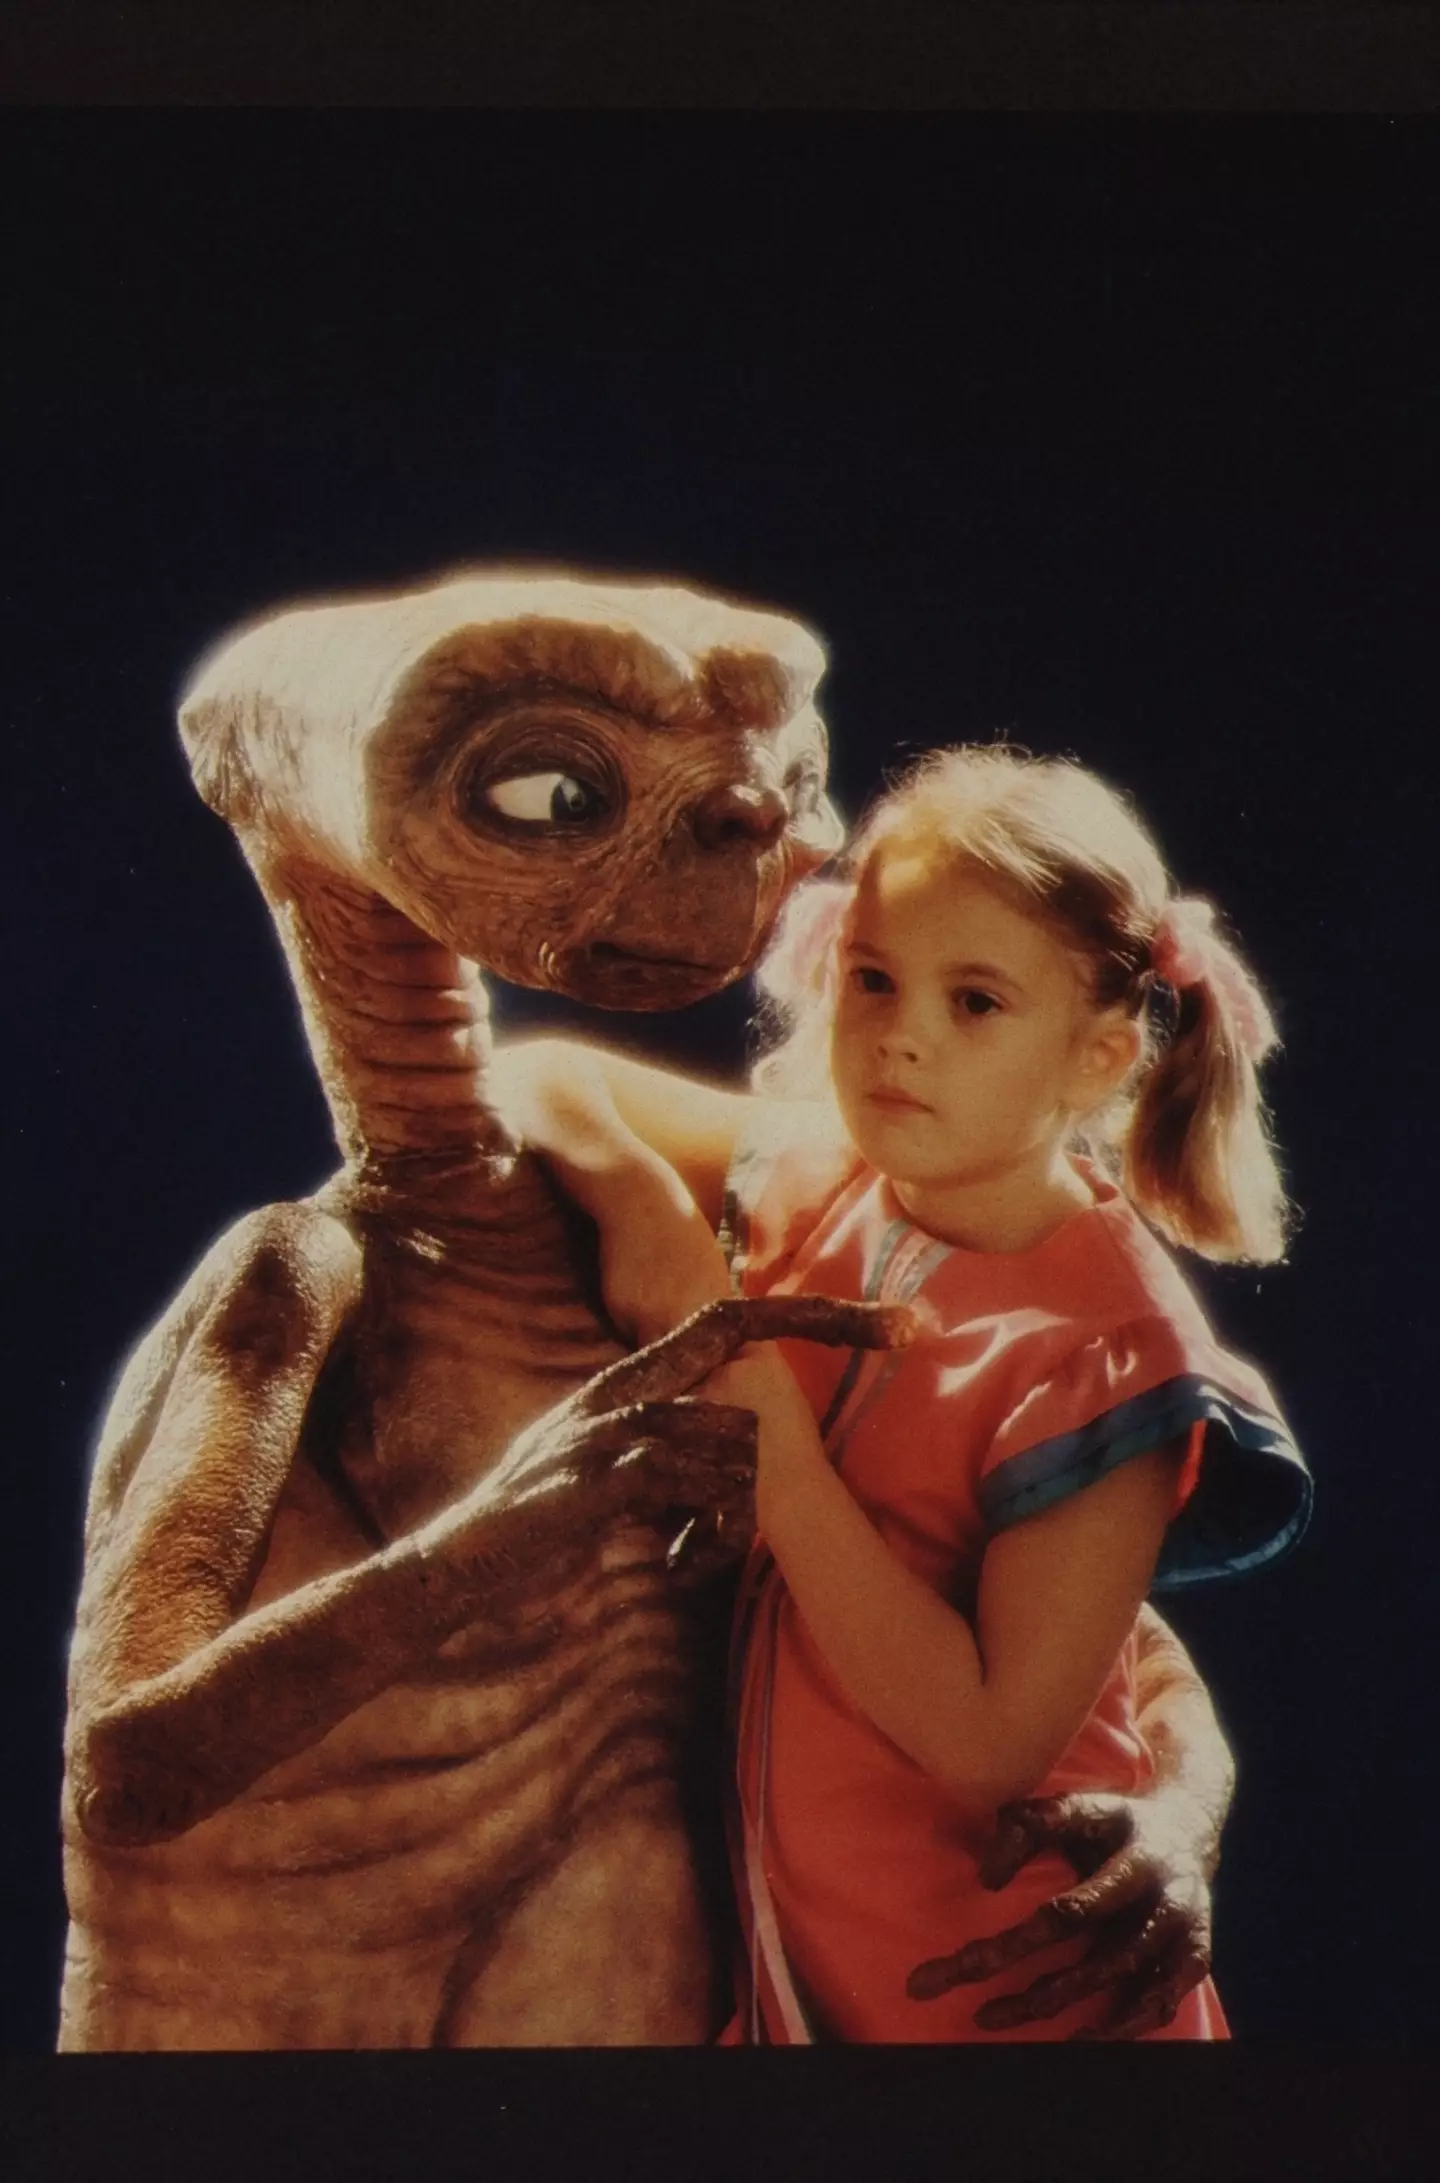 Drew Barrymore appeared in ET in the 80s. (Mark Sennet/Getty Images)